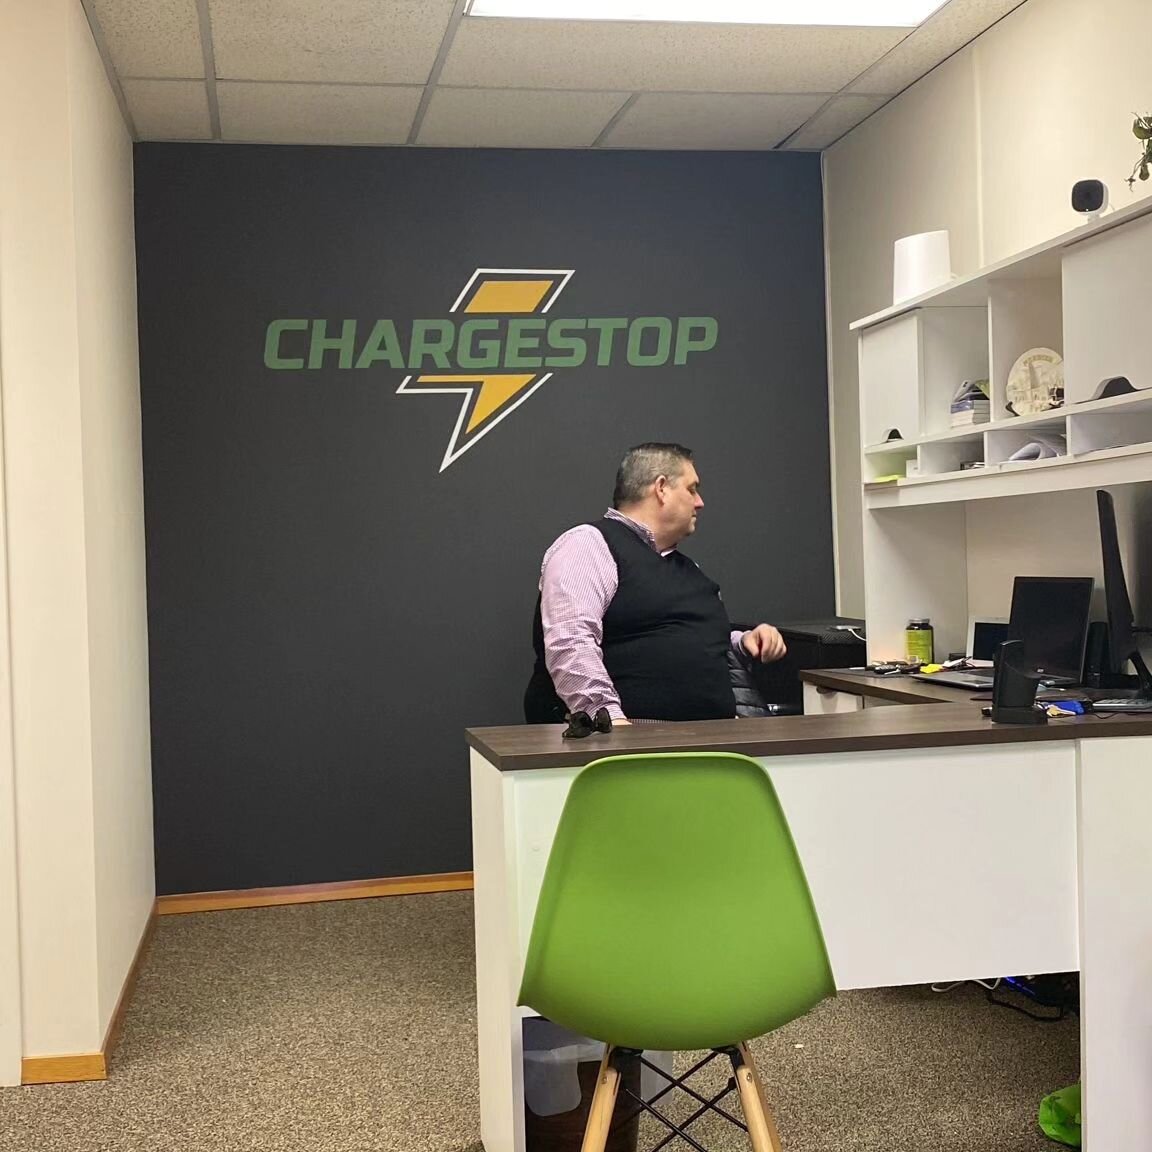 ⚡️Chargestop⚡️going up!